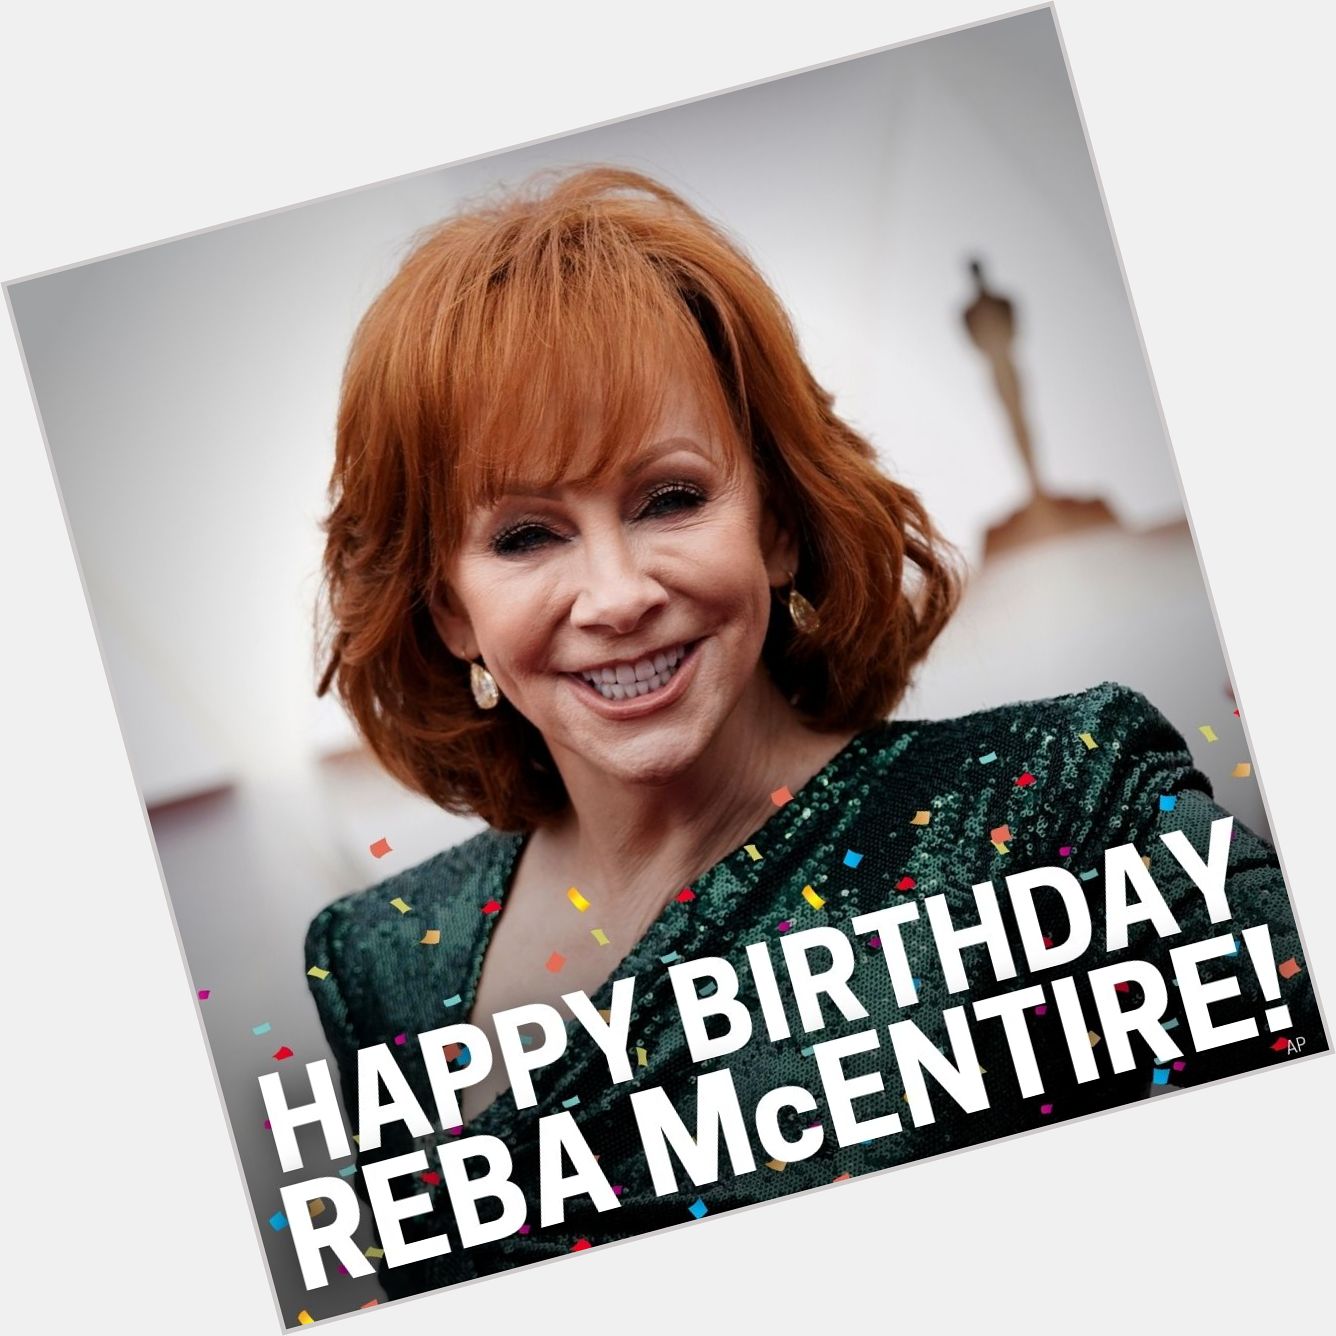    Happy 67th Birthday to country music superstar, Reba McEntire!

What is your favorite Reba song? 